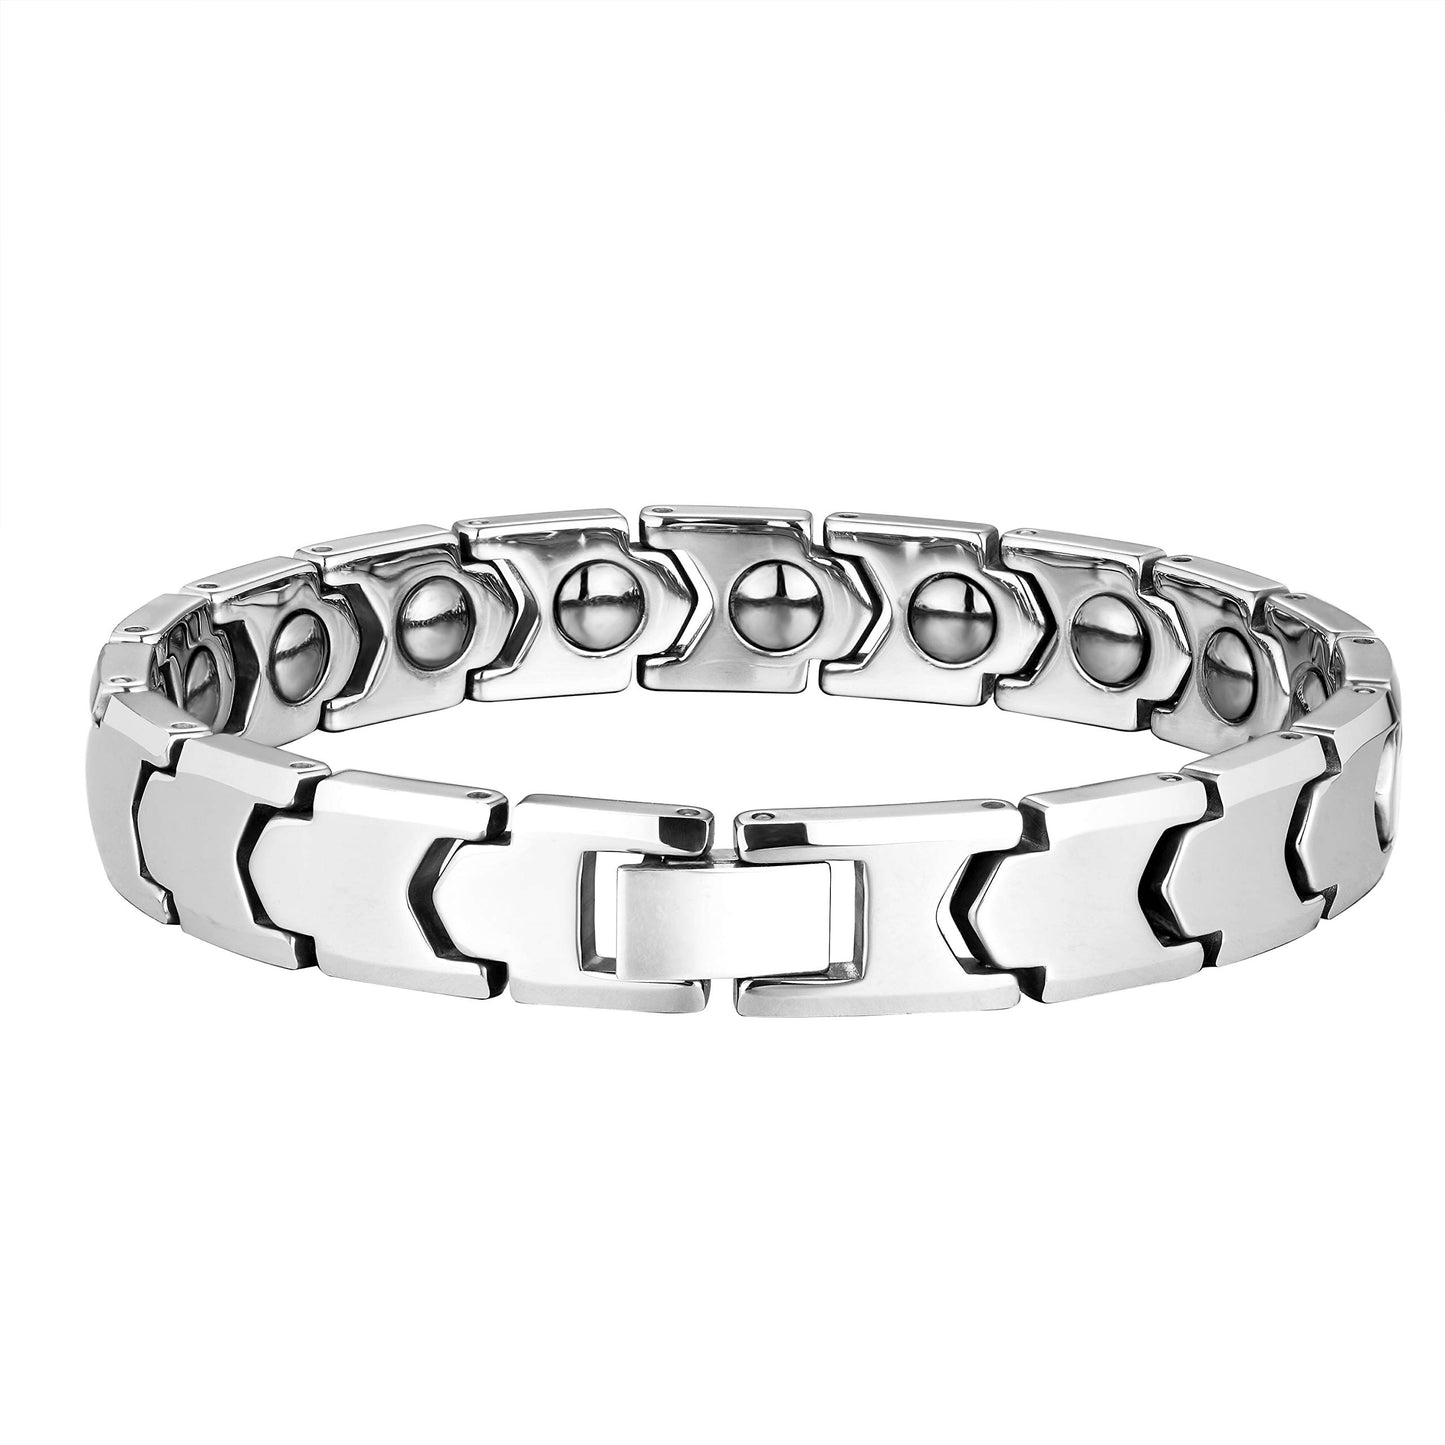 URBAN JEWELRY Stunning Solid Tungsten Link Bracelet for Men Polished Link, Puzzle, Ceramic Style (Silver, Black, 18K Gold Plated Option)